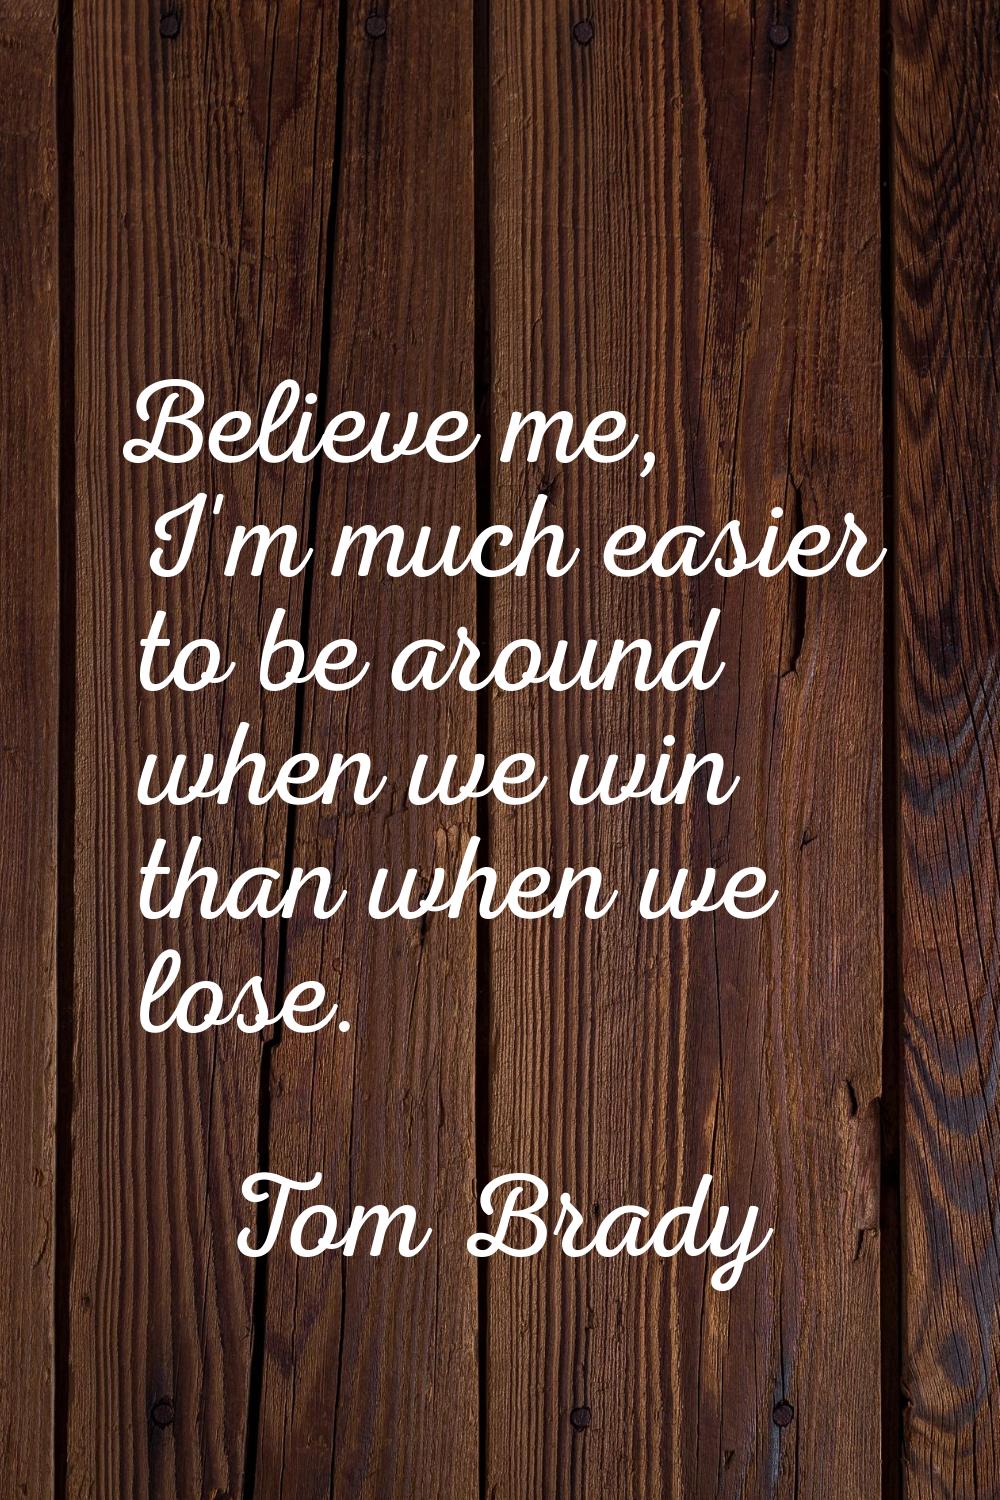 Believe me, I'm much easier to be around when we win than when we lose.